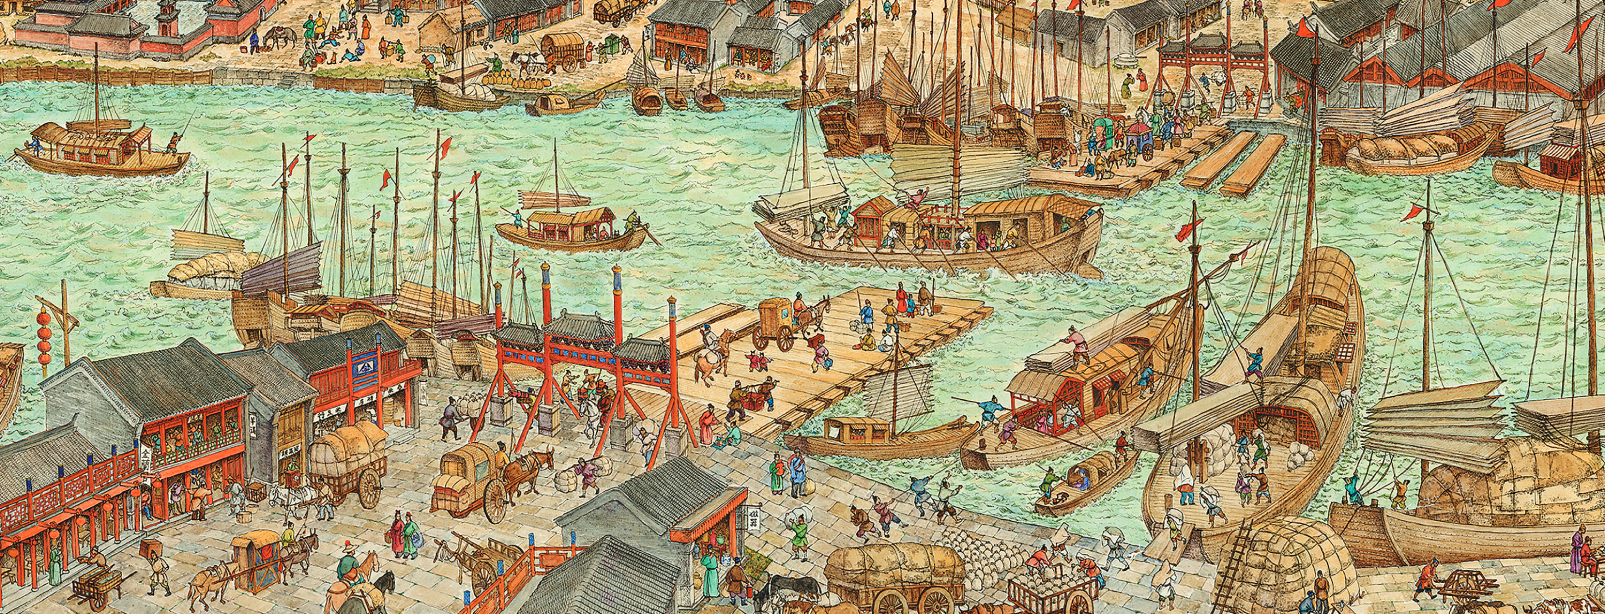 Grand Canal of China: When & Why Was the Grand Canal Built? Who Built the Grand  Canal?, by Pandarow